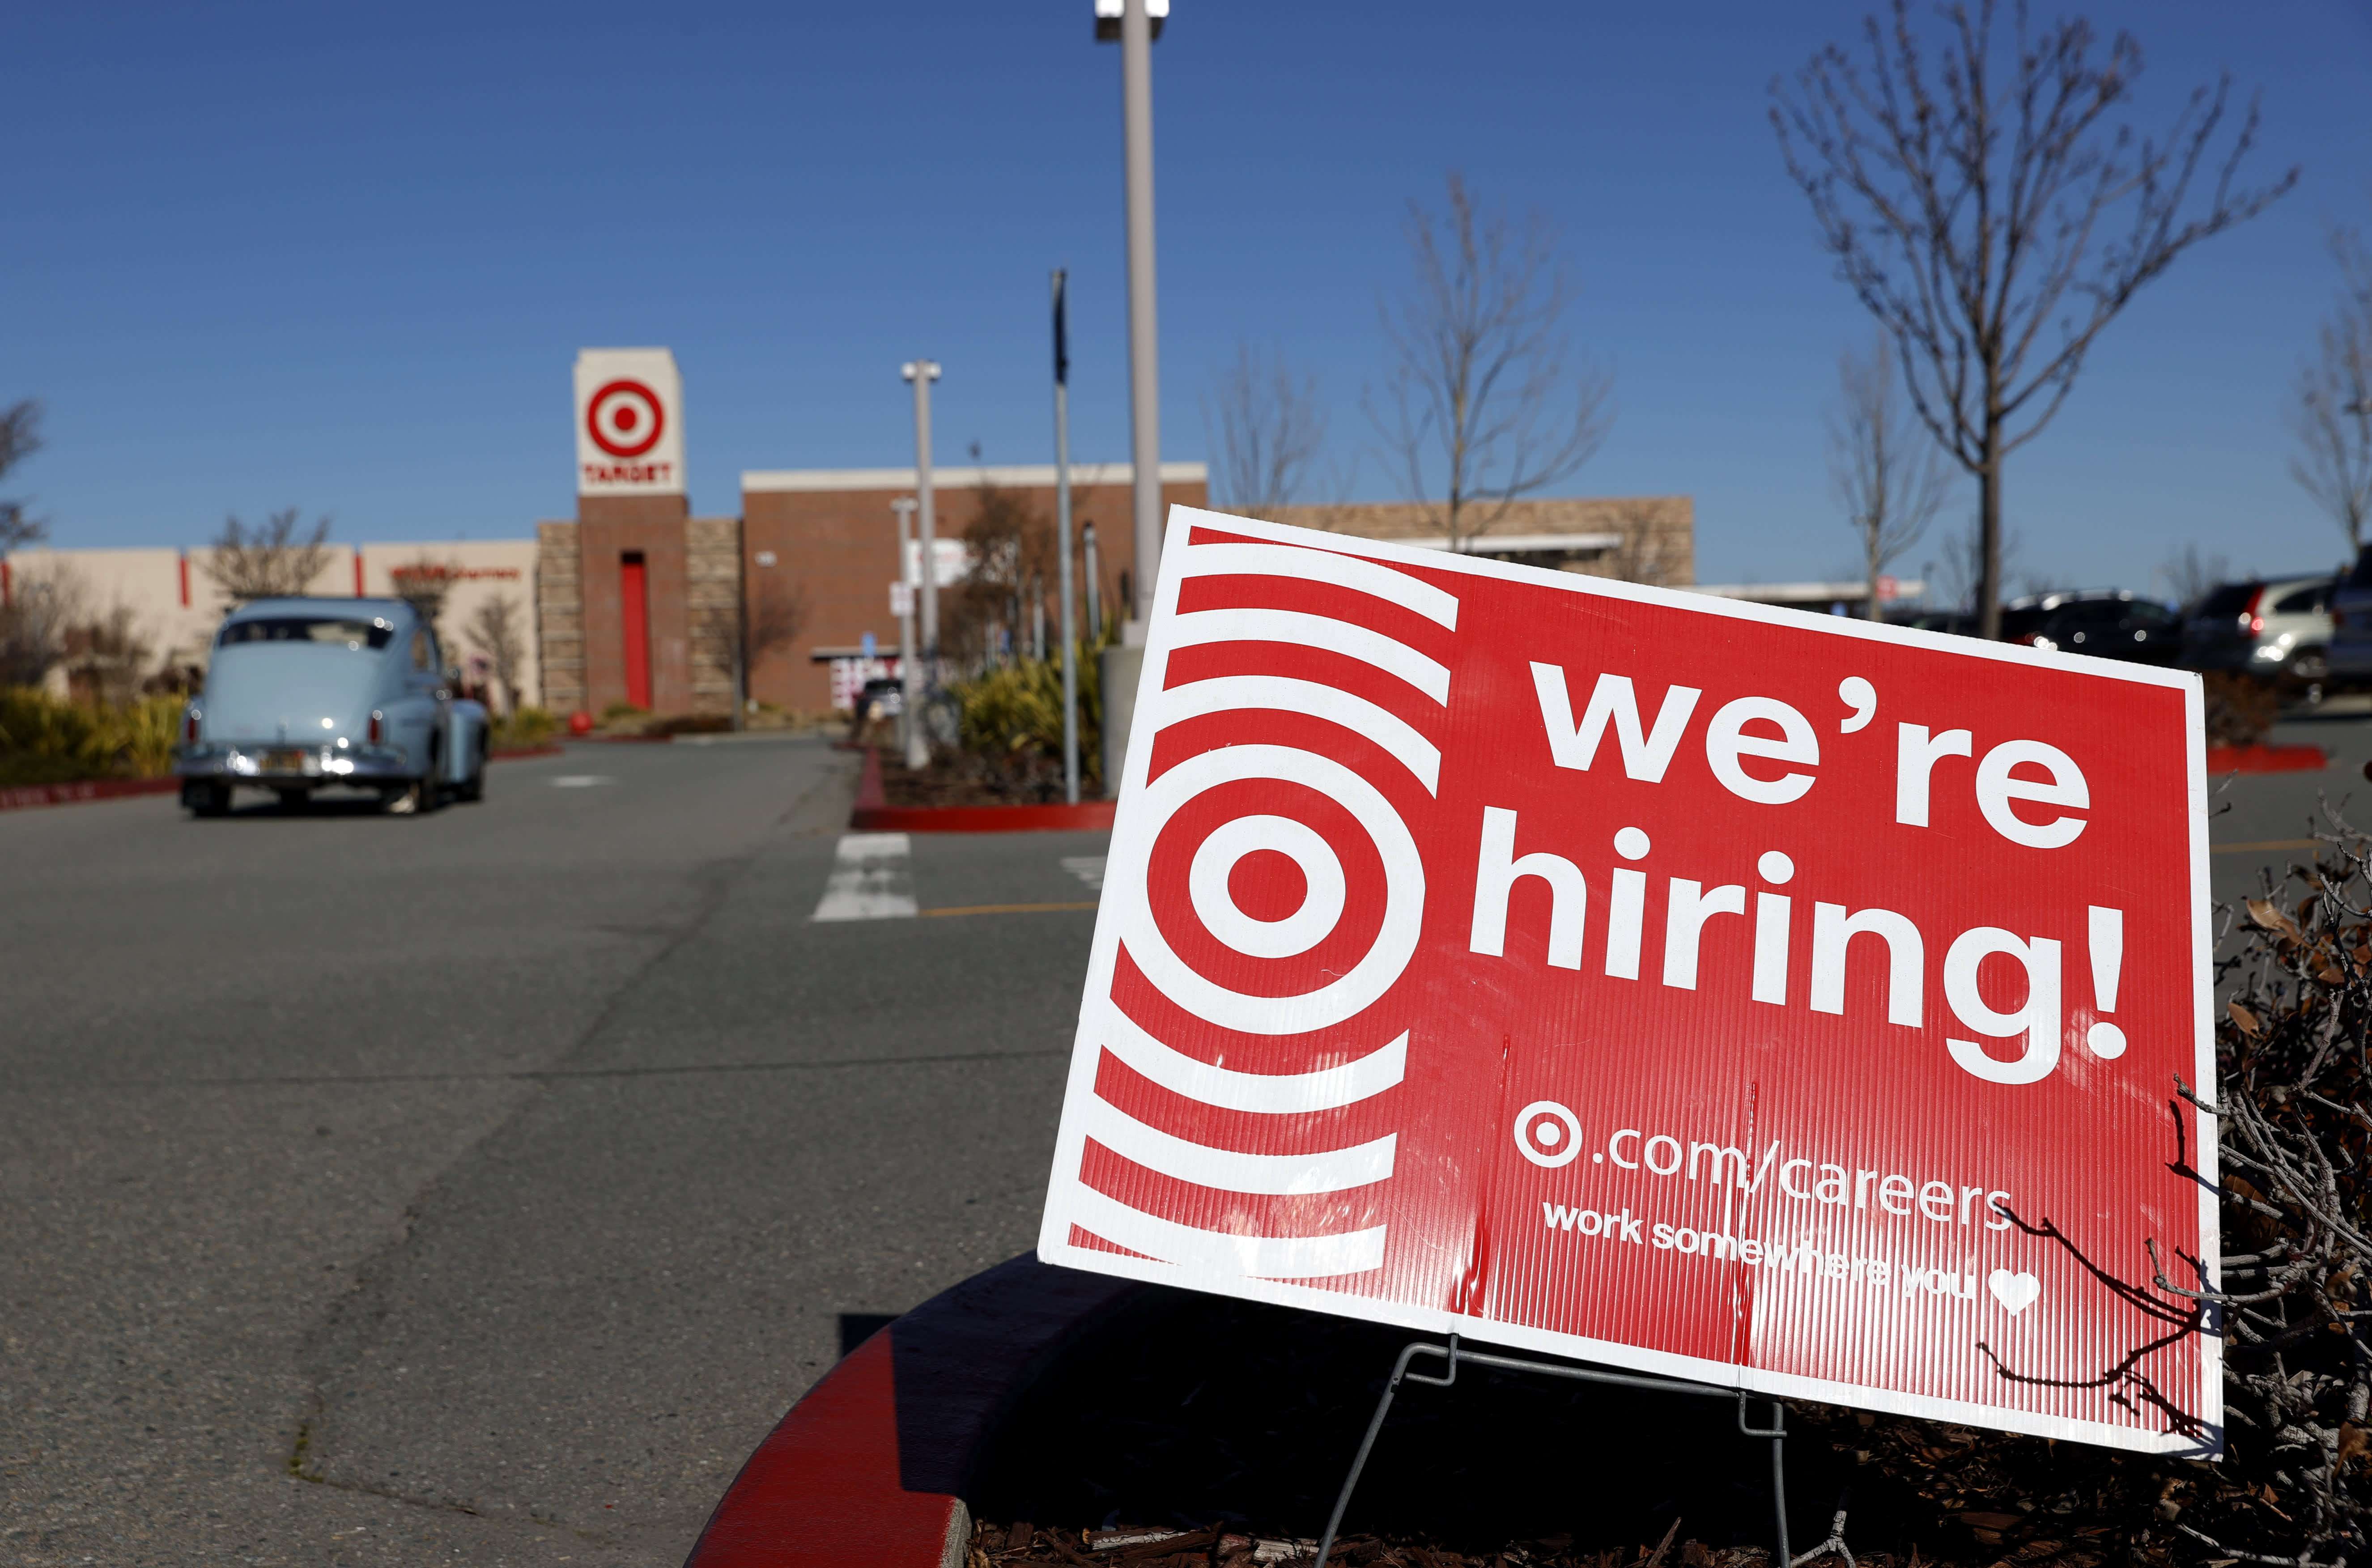 Target said Wednesday it will offer new perks to woo workers: a debt-free way to get a college degree and payments toward graduate programs. Starting 